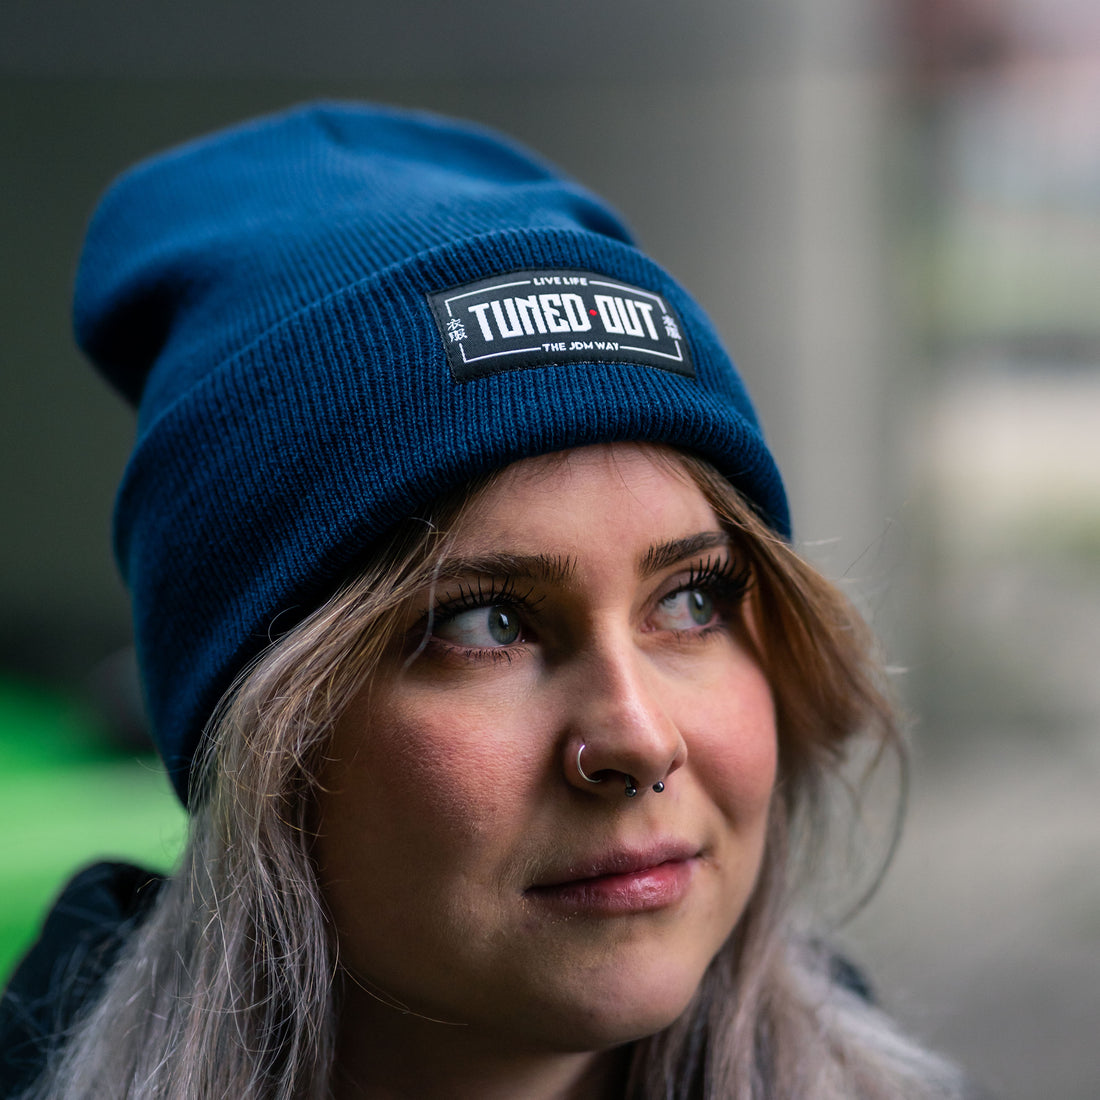 Tuned-Out beanie